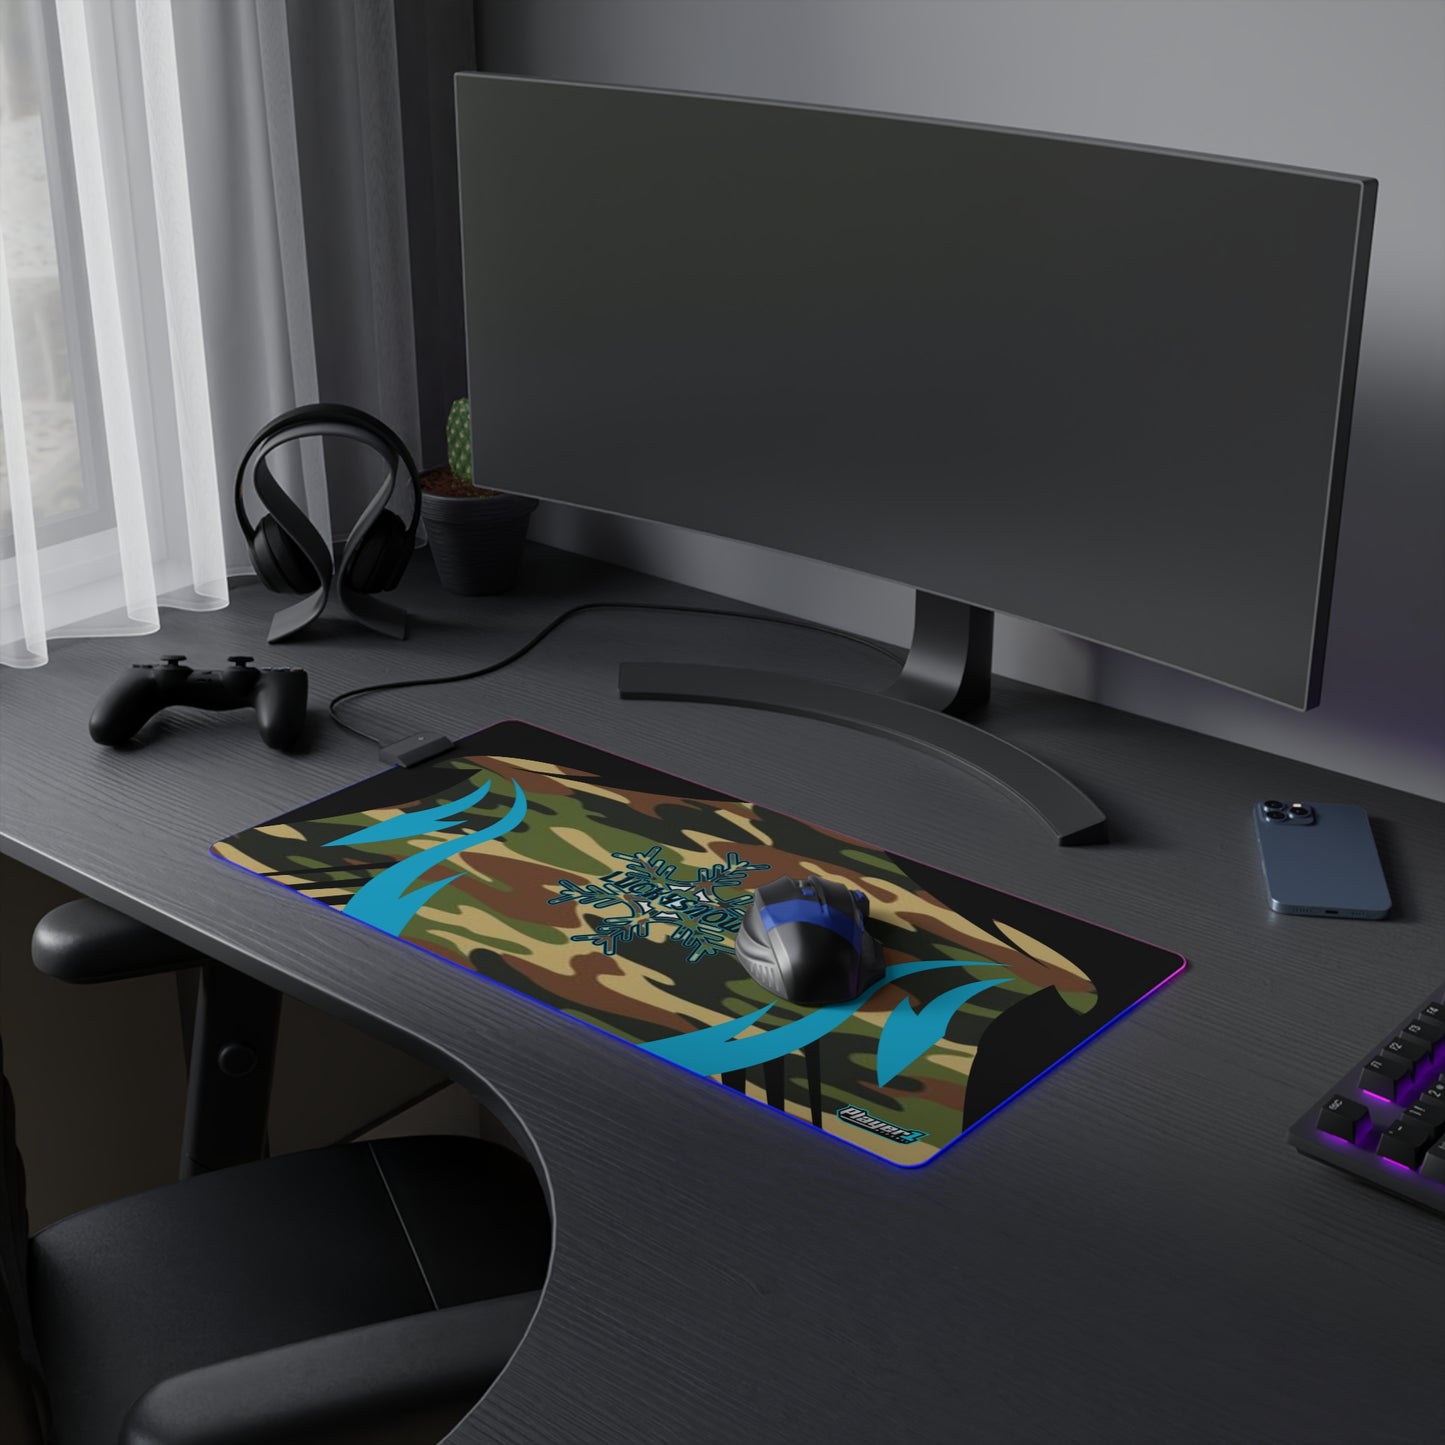 LuckySnow LED Gaming Mouse Pad